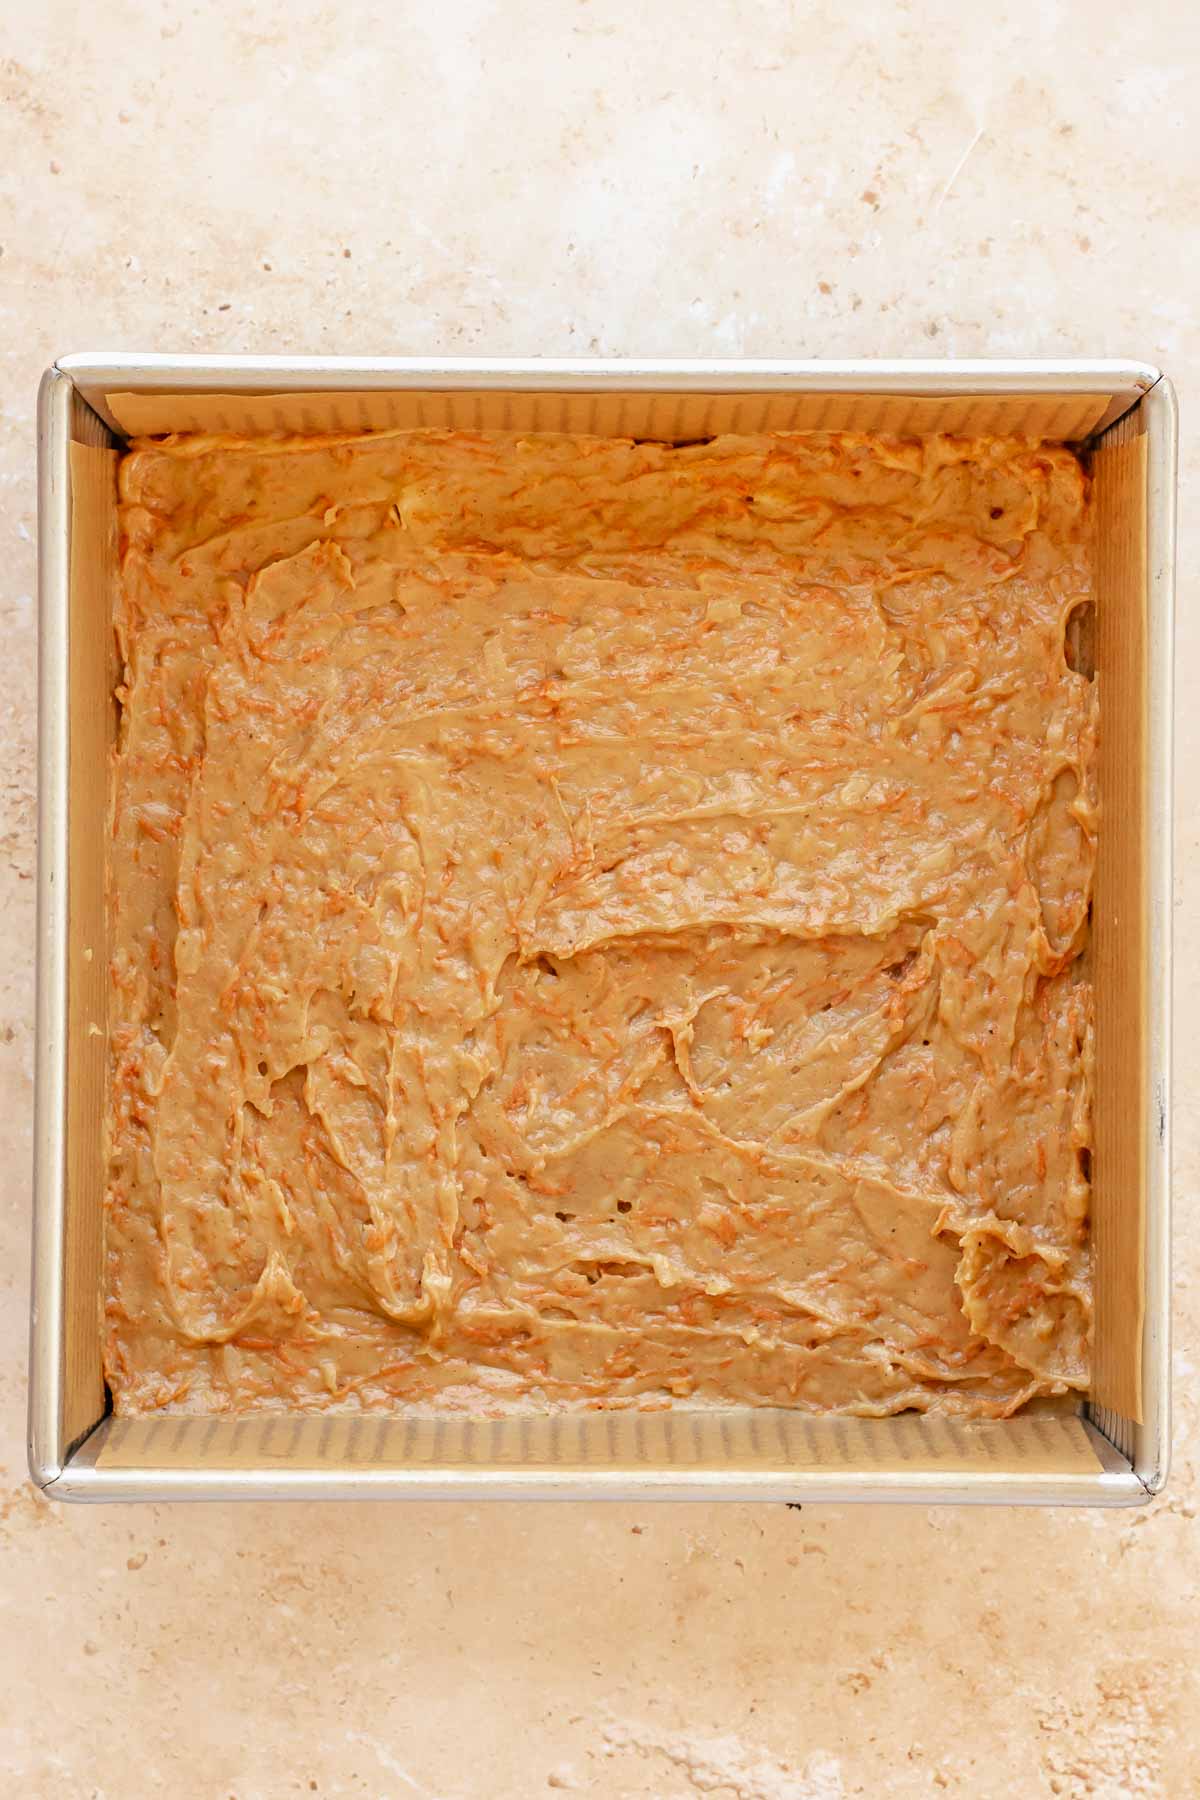 Carrot cake batter spread into a square pan.